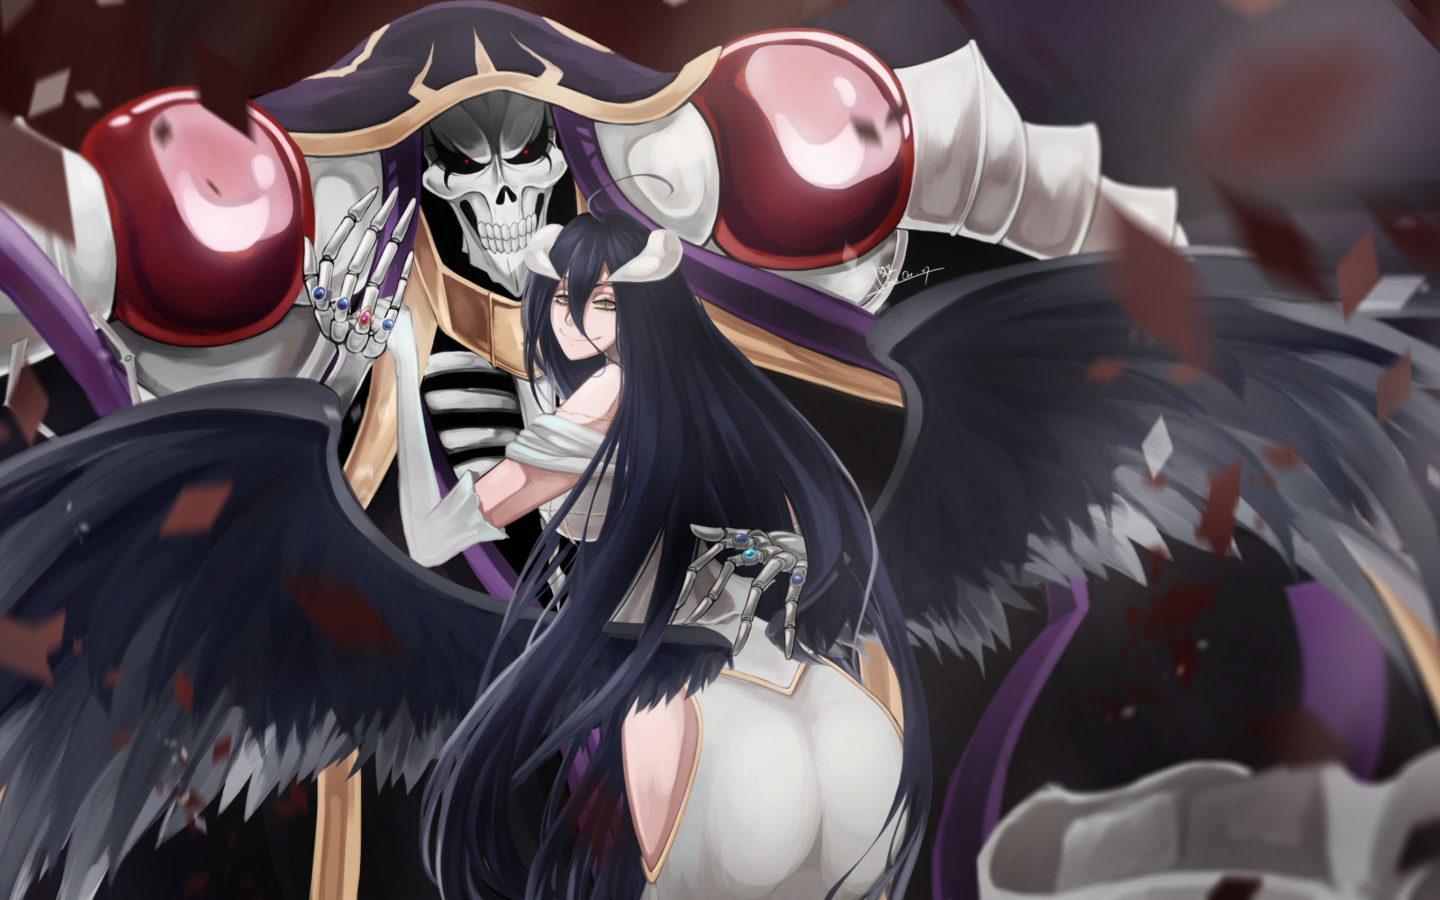 Free download Anime Overlord Overlord Albedo Ainz Ooal Gown Fondo de Pantalla [2835x1701] for your Desktop, Mobile & Tablet. Explore Overlord Anime Albedo Wallpaper. Overlord Anime Albedo Wallpaper, Overlord